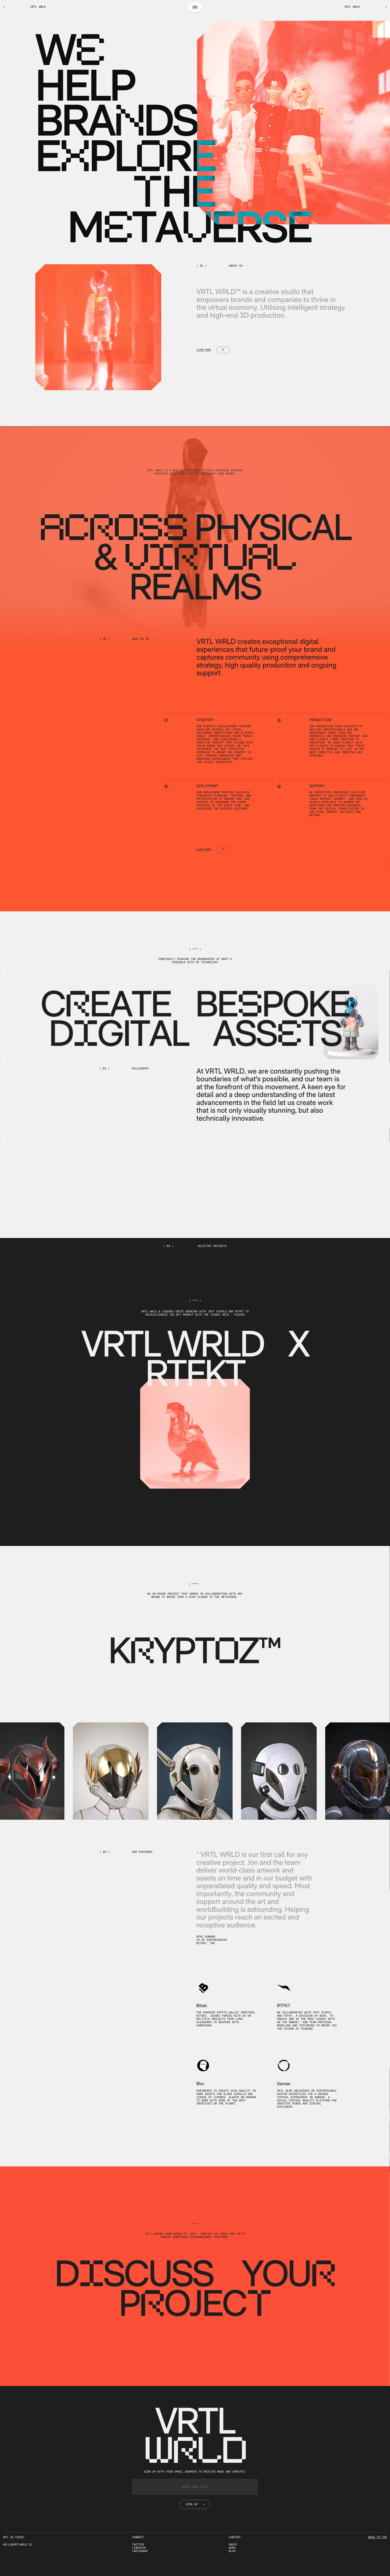 VRTL WRLD Landing Page Example: VRTL WRLD is a creative studio specialising in 3D design and production, utilizing the most advanced technology to assist brands in creating content and experiences that span both the physical and virtual realms.